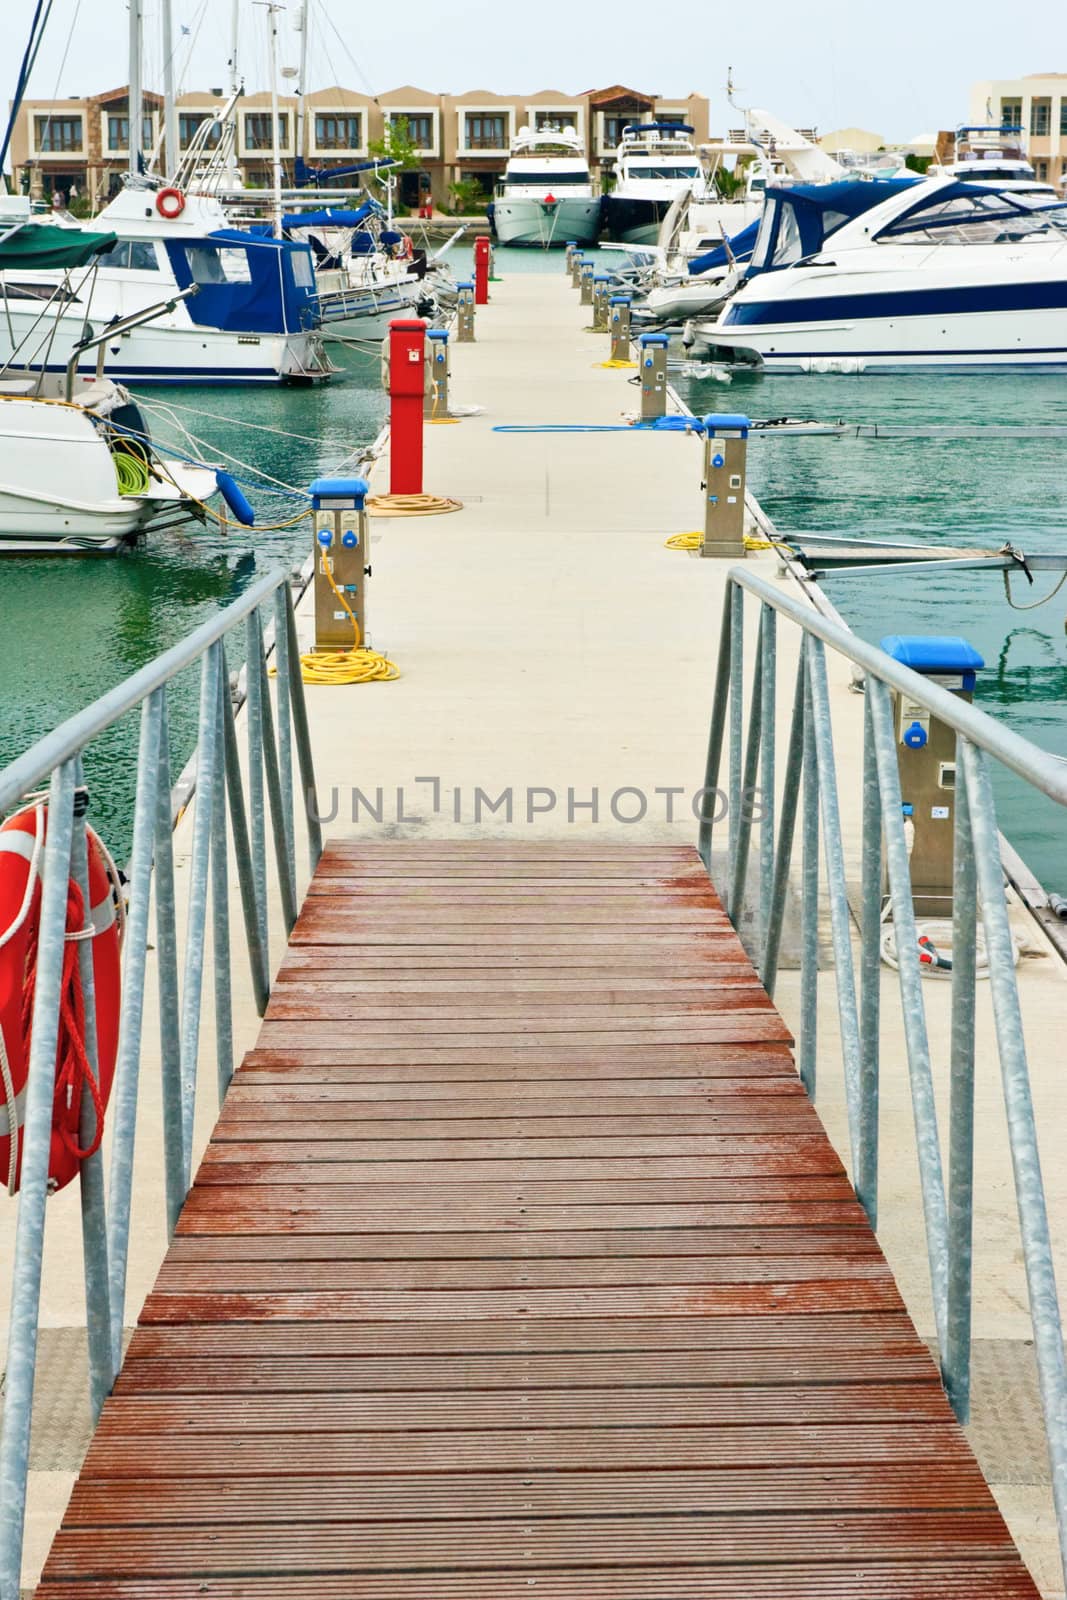 Pier with moored yachts